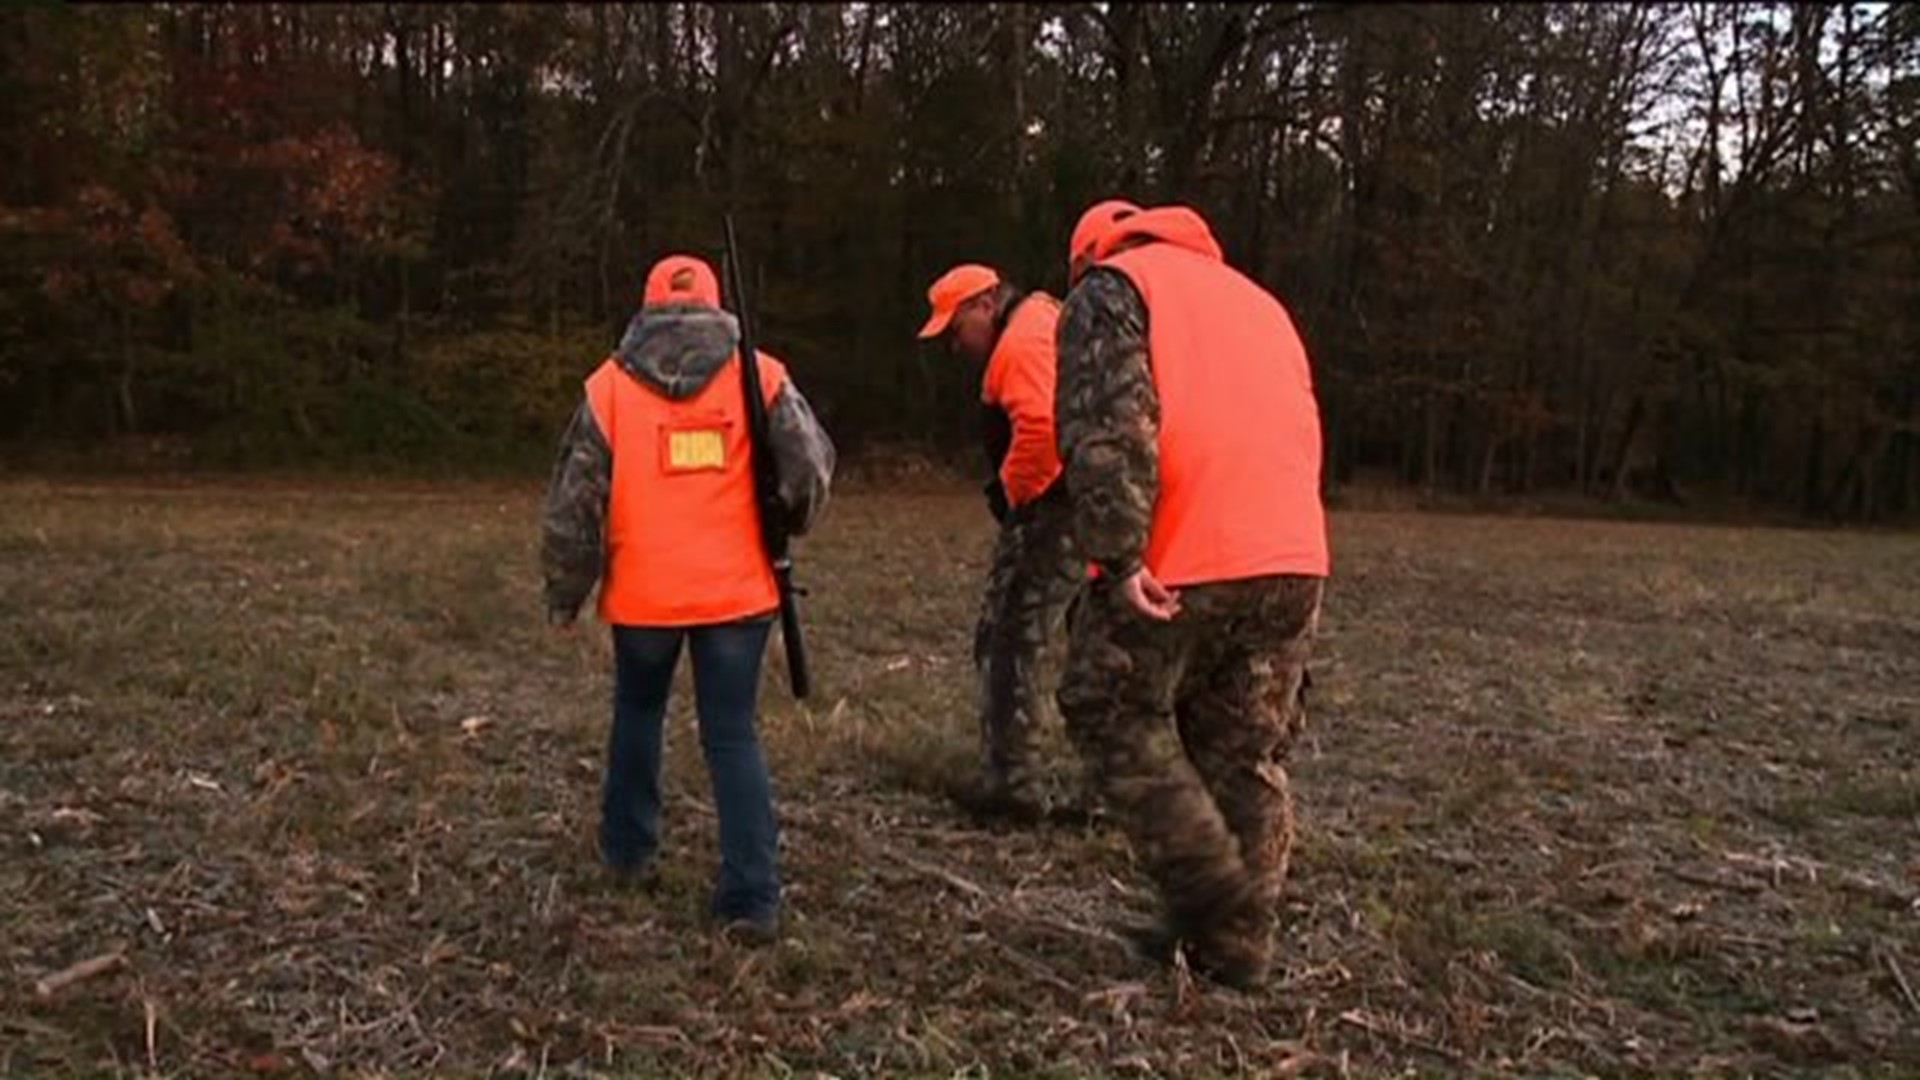 New Bill Could Allow Sunday Hunting for Youths